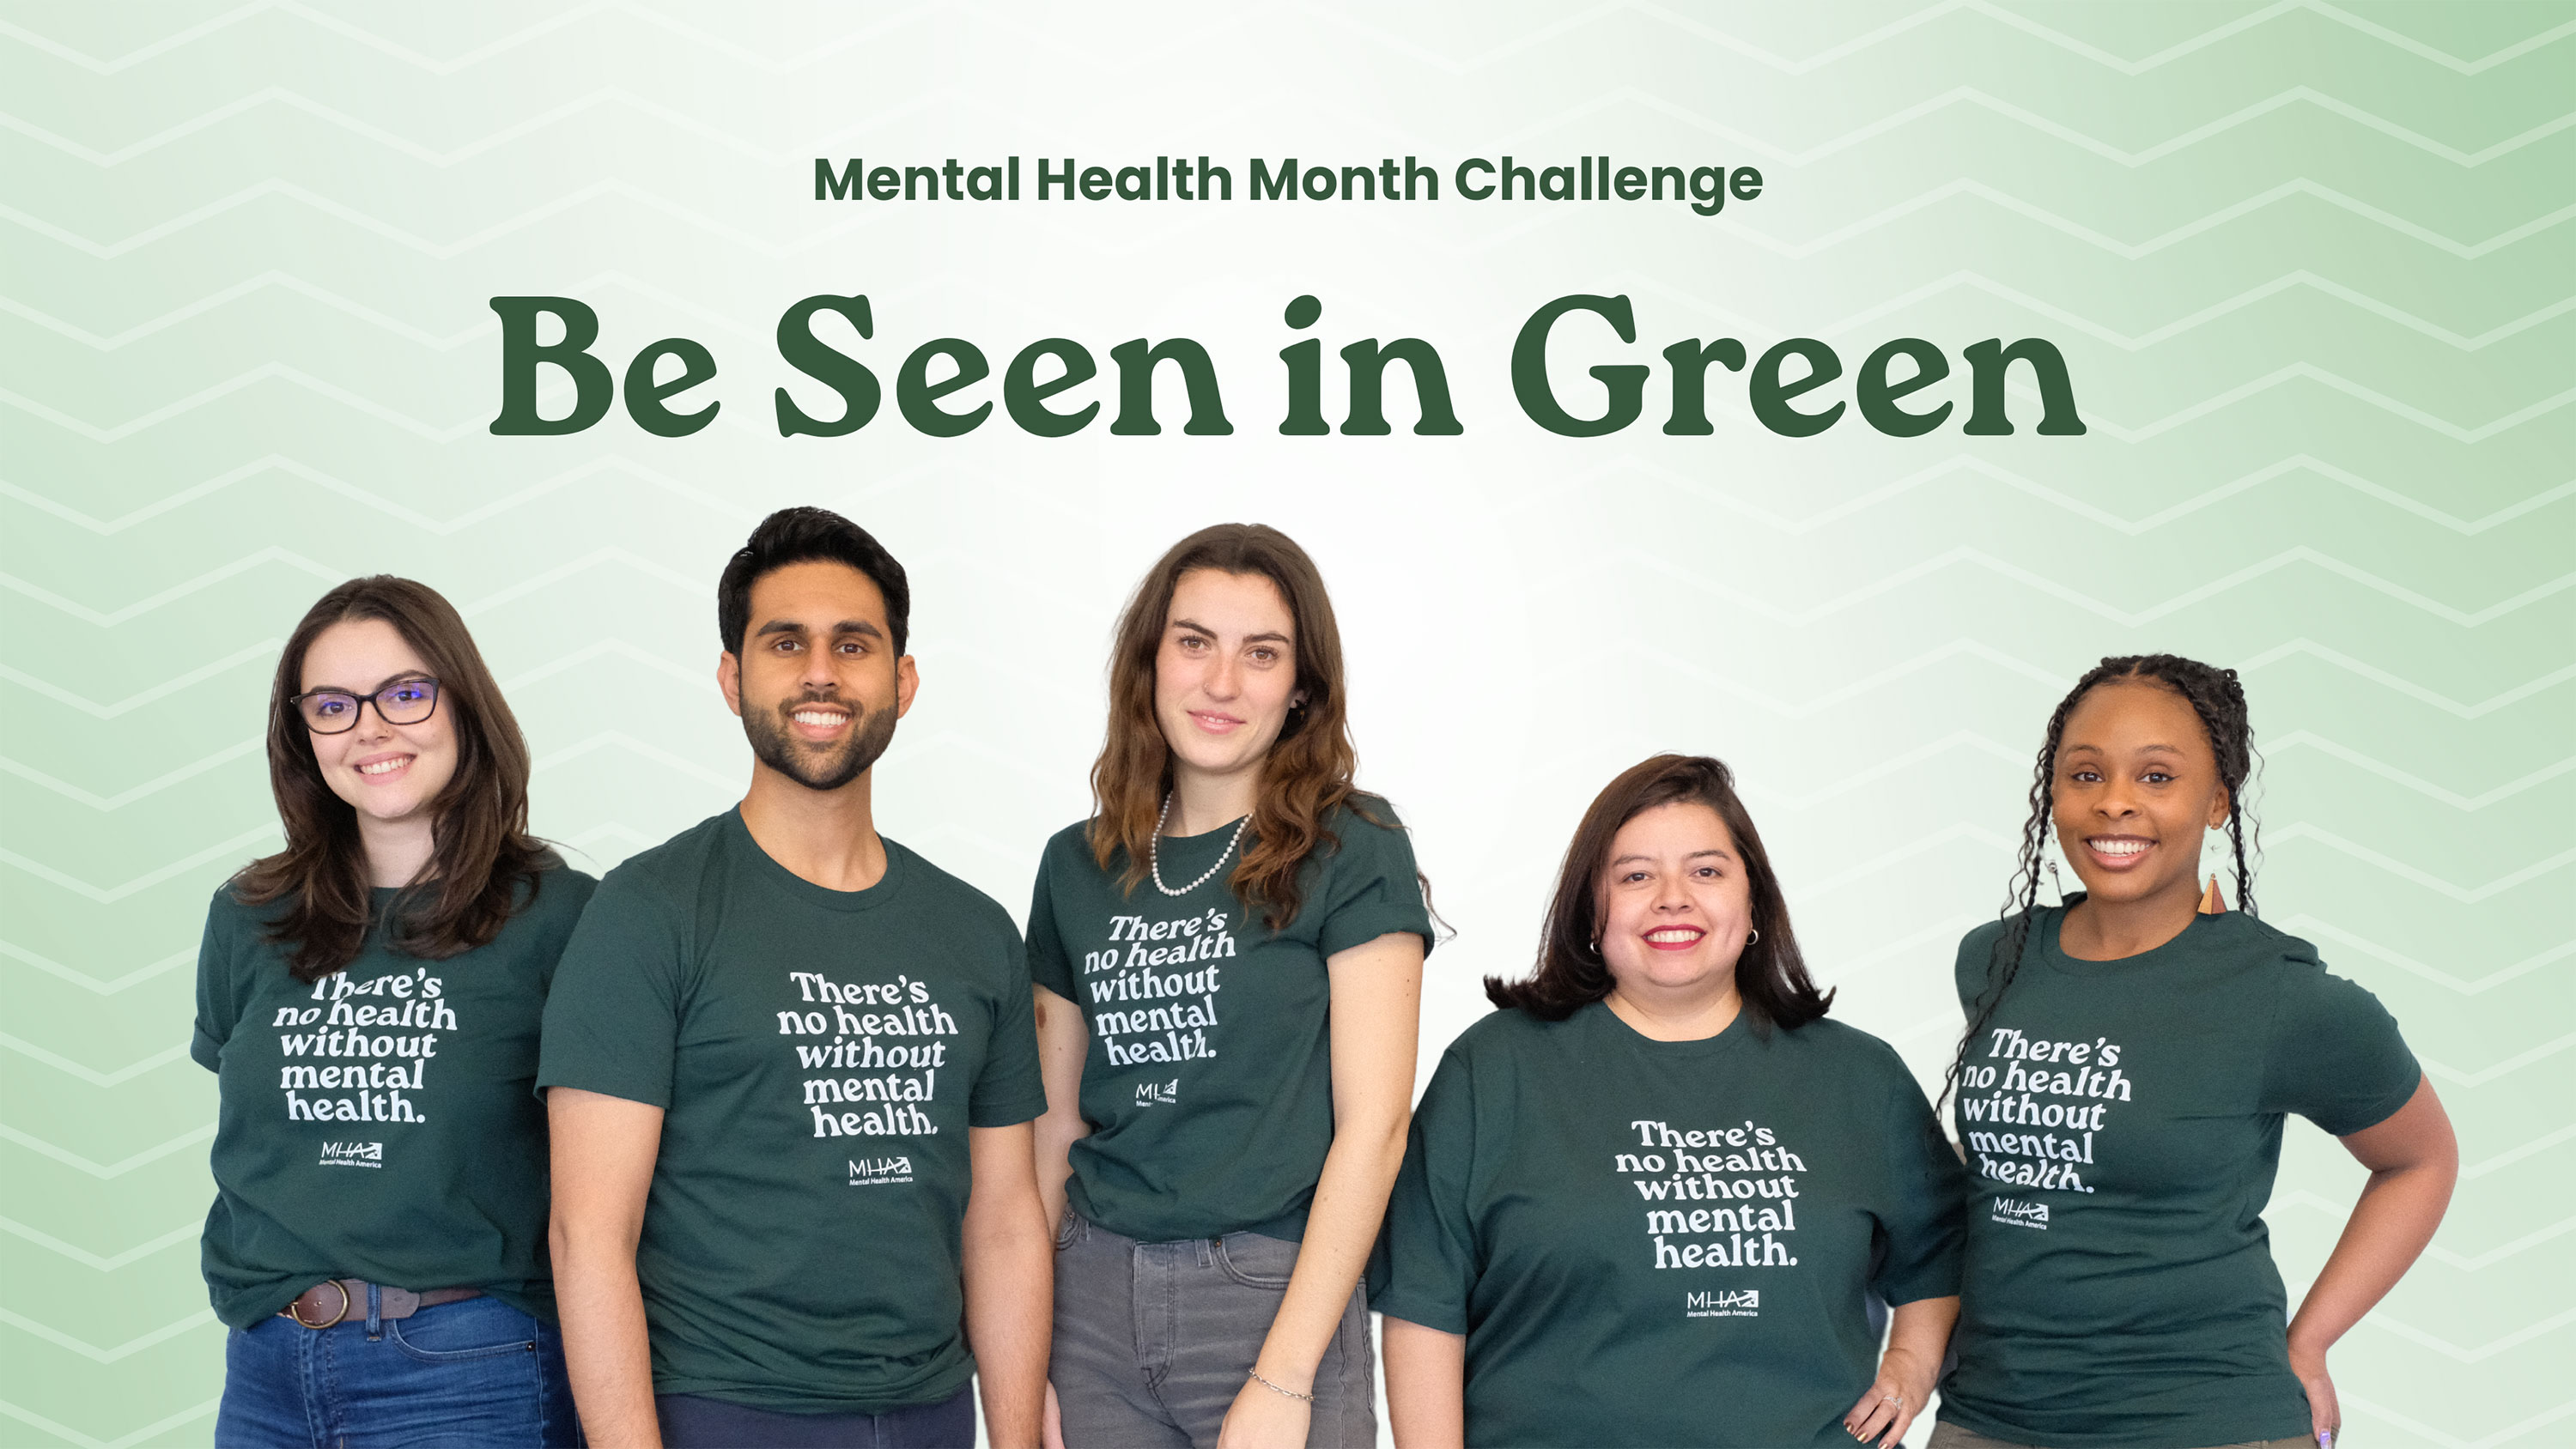 Mental Health Month Challenge: Be Seen in Green with individuals wearing green t-shirts